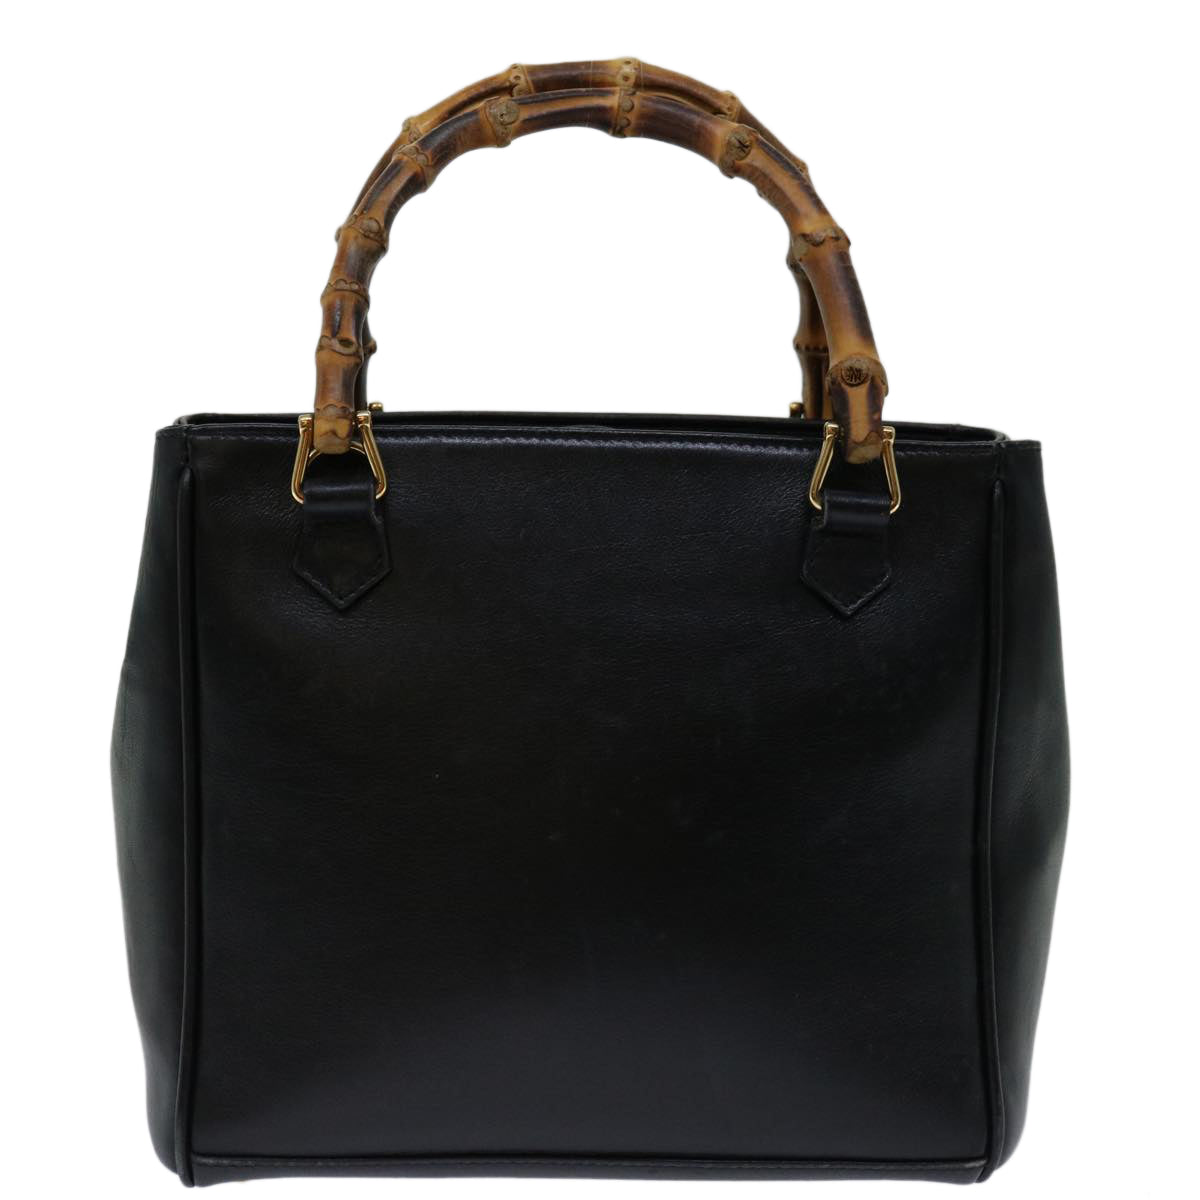 GUCCI Bamboo Hand Bag Leather Black 000 122 0316 Auth 68517 - 0